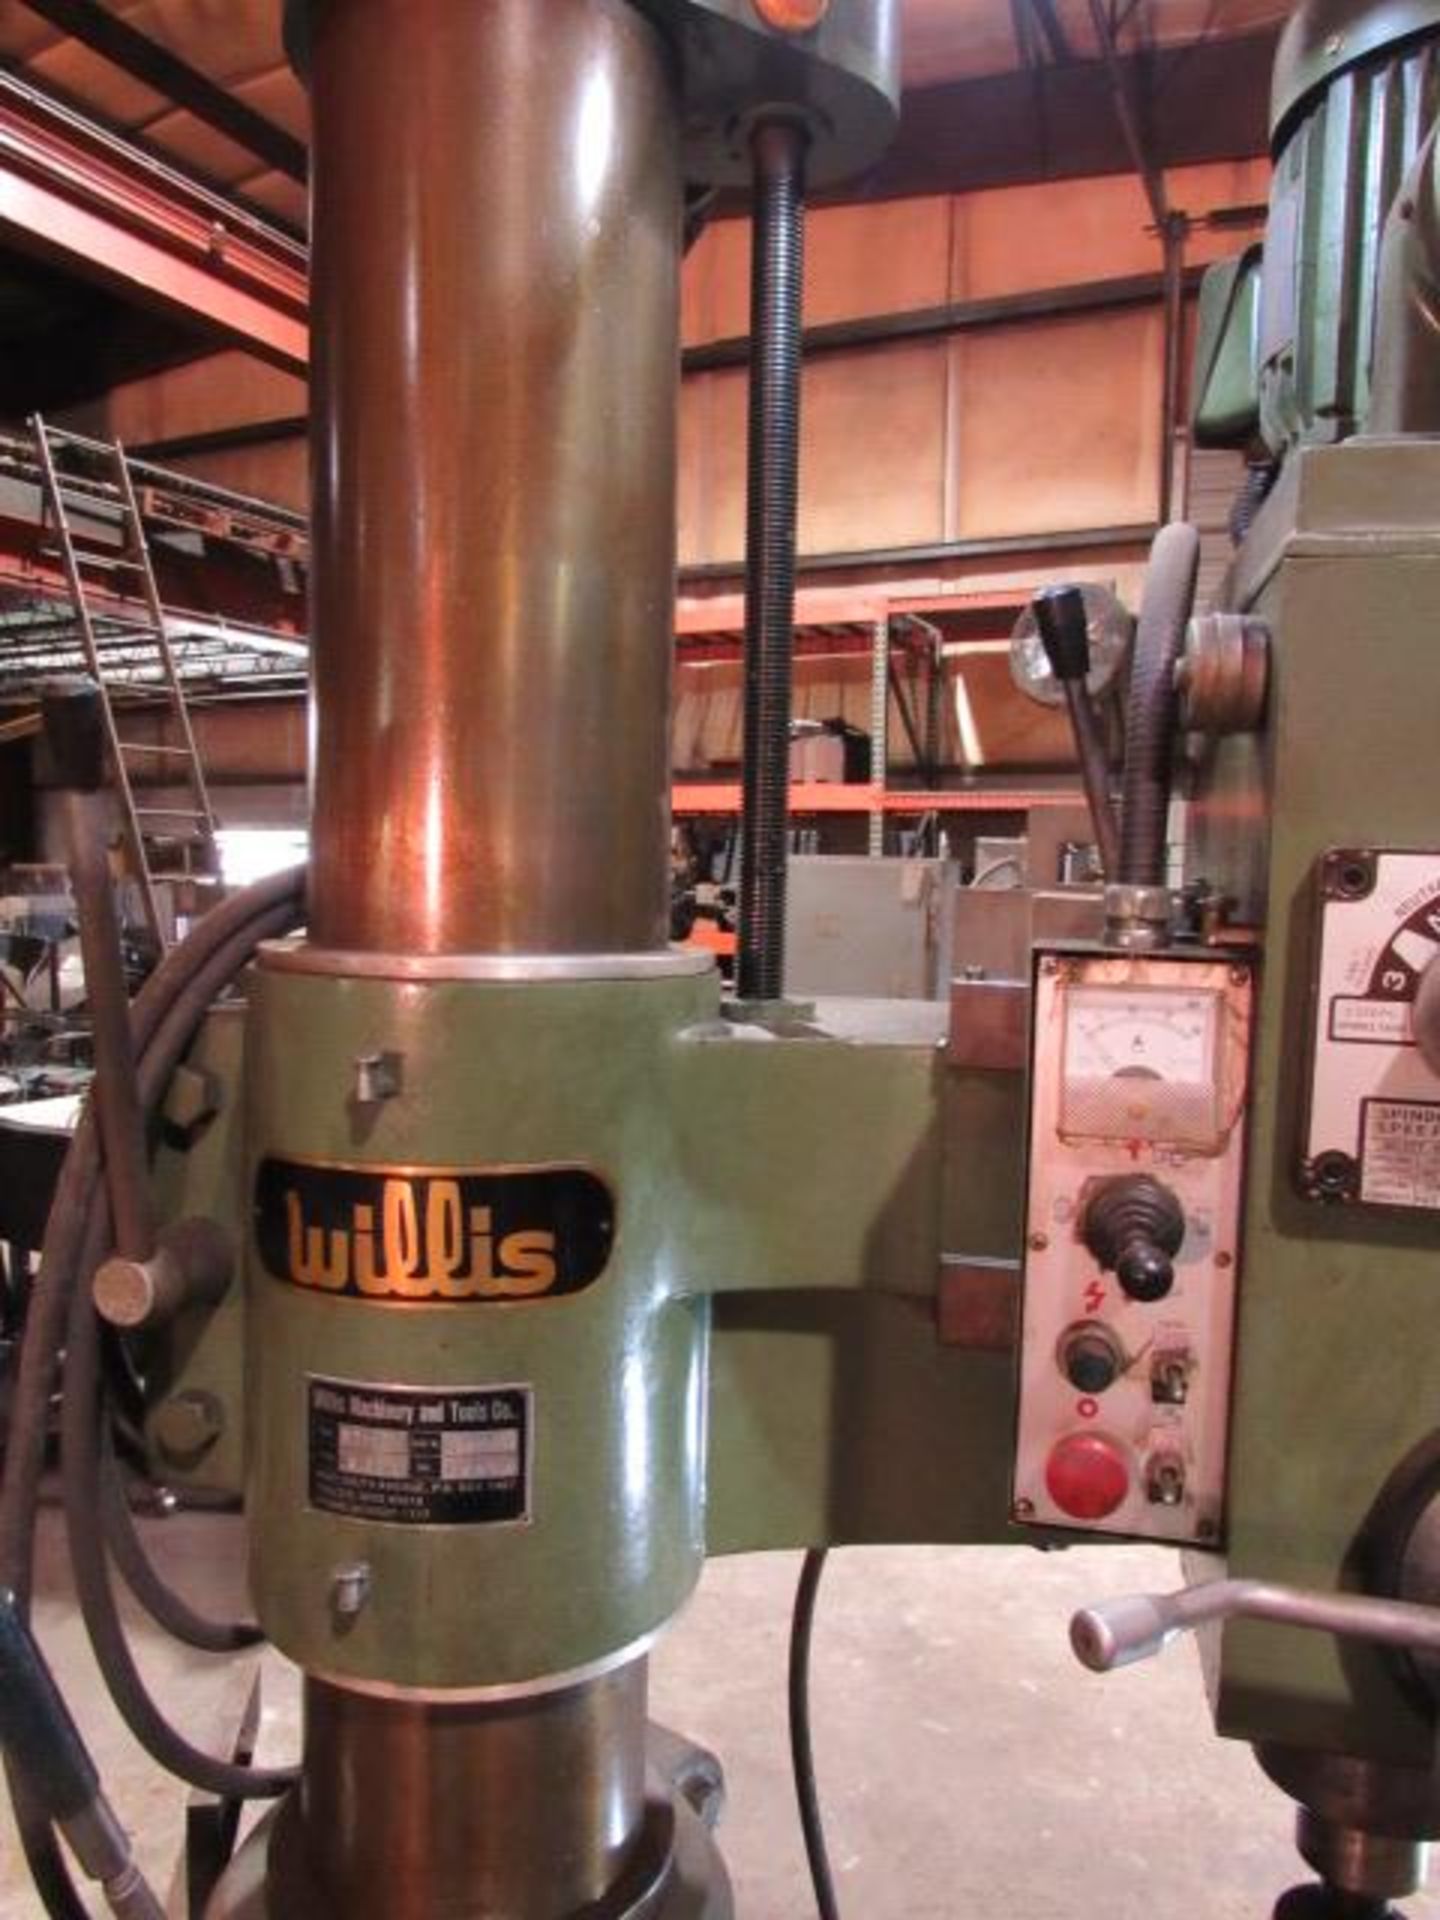 Willis RD-750, 30'' Radial Arm Drill with 8'' Column, 1-1/2'' Drilling Capacity, T-Slotted Box - Image 3 of 8